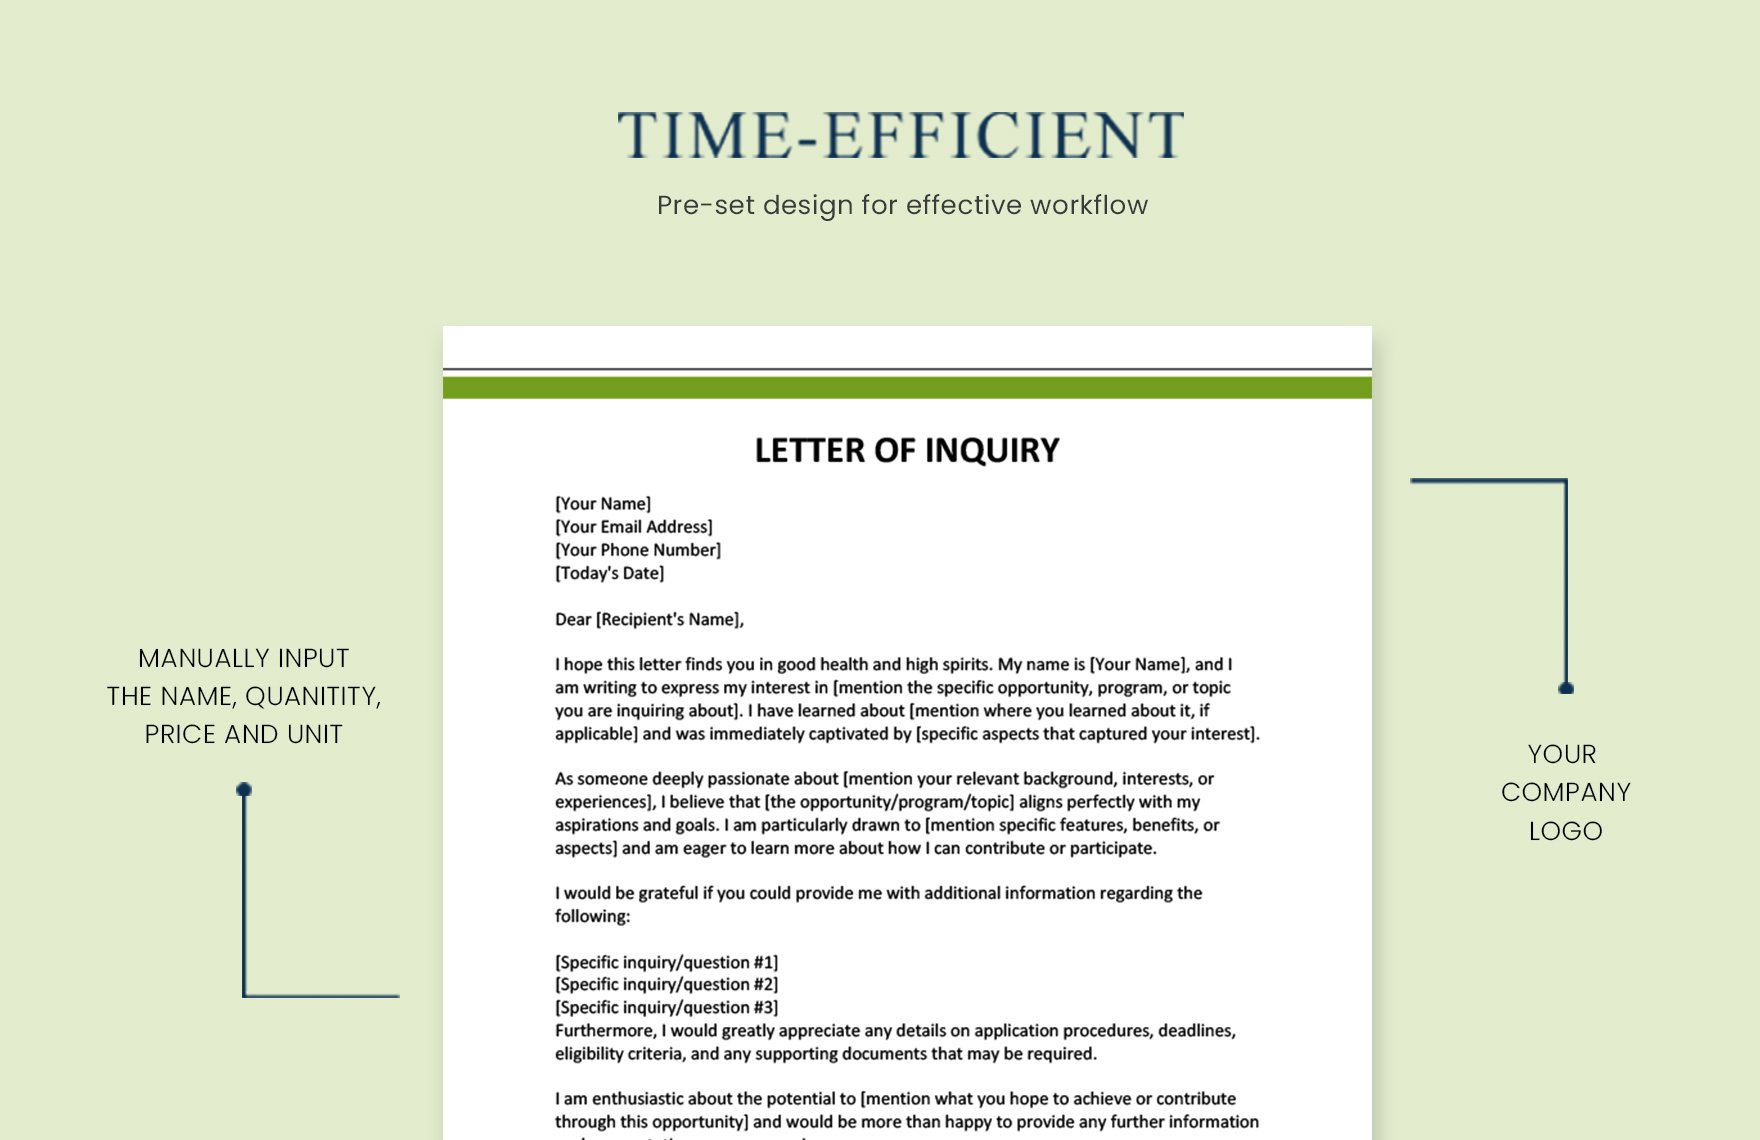 Letter of Inquiry